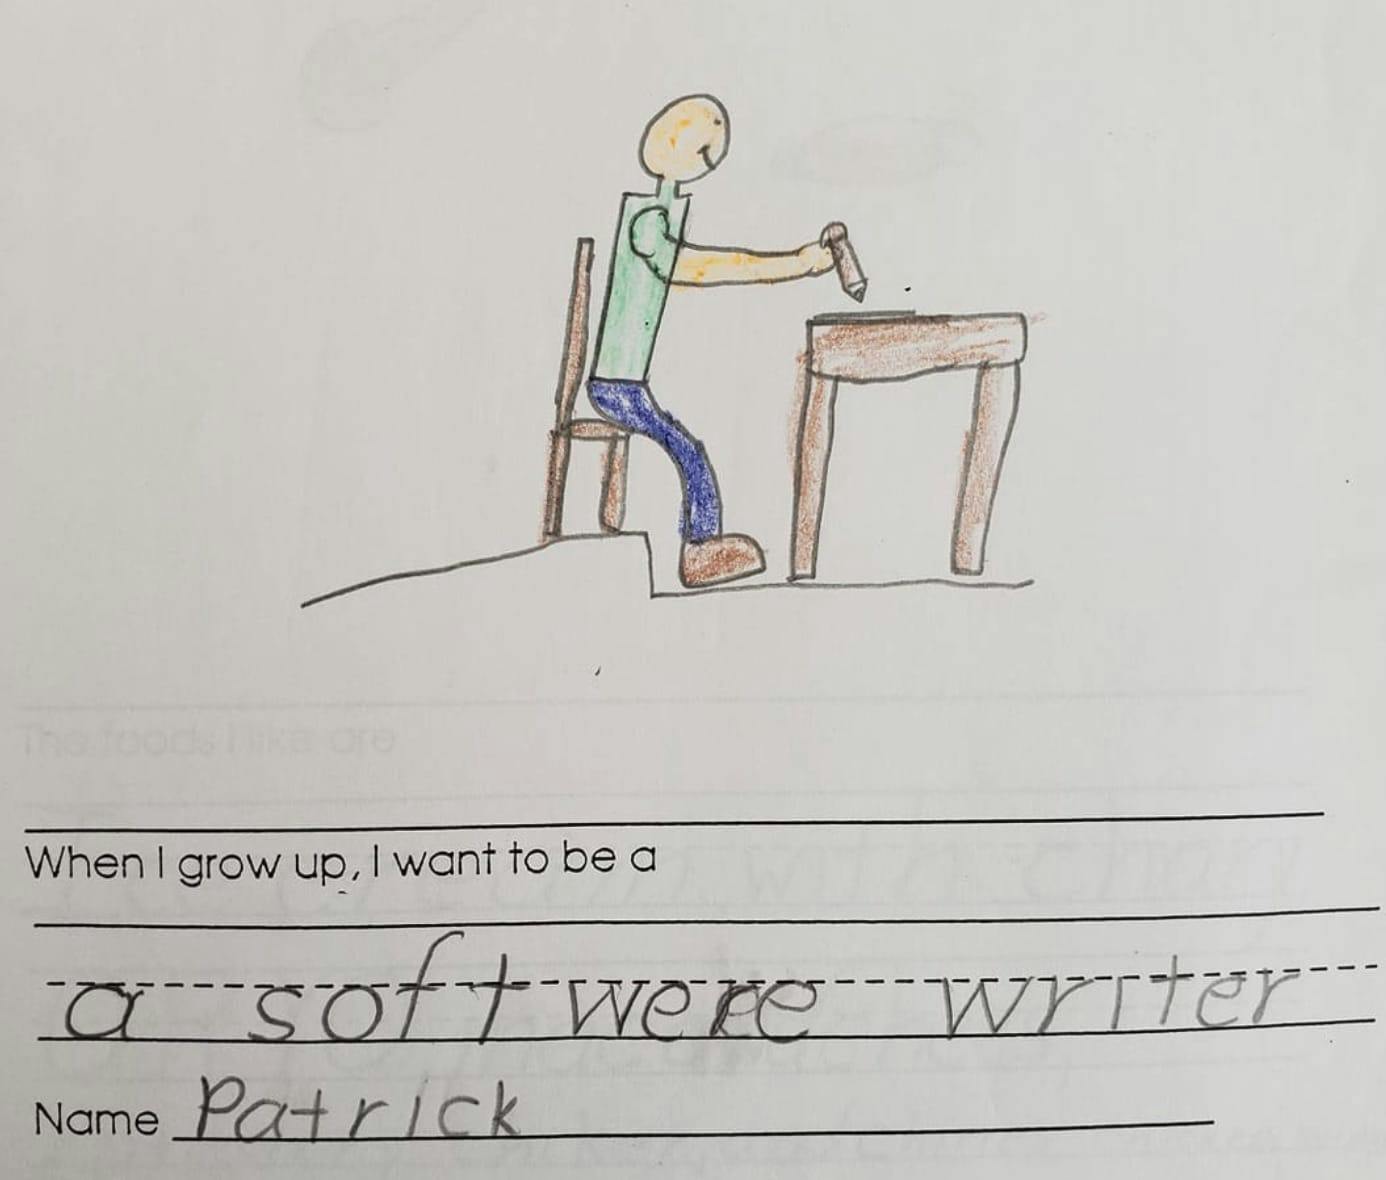 child's drawing of a person at a desk with the caption "When I grow up I want to be a softwere writer"